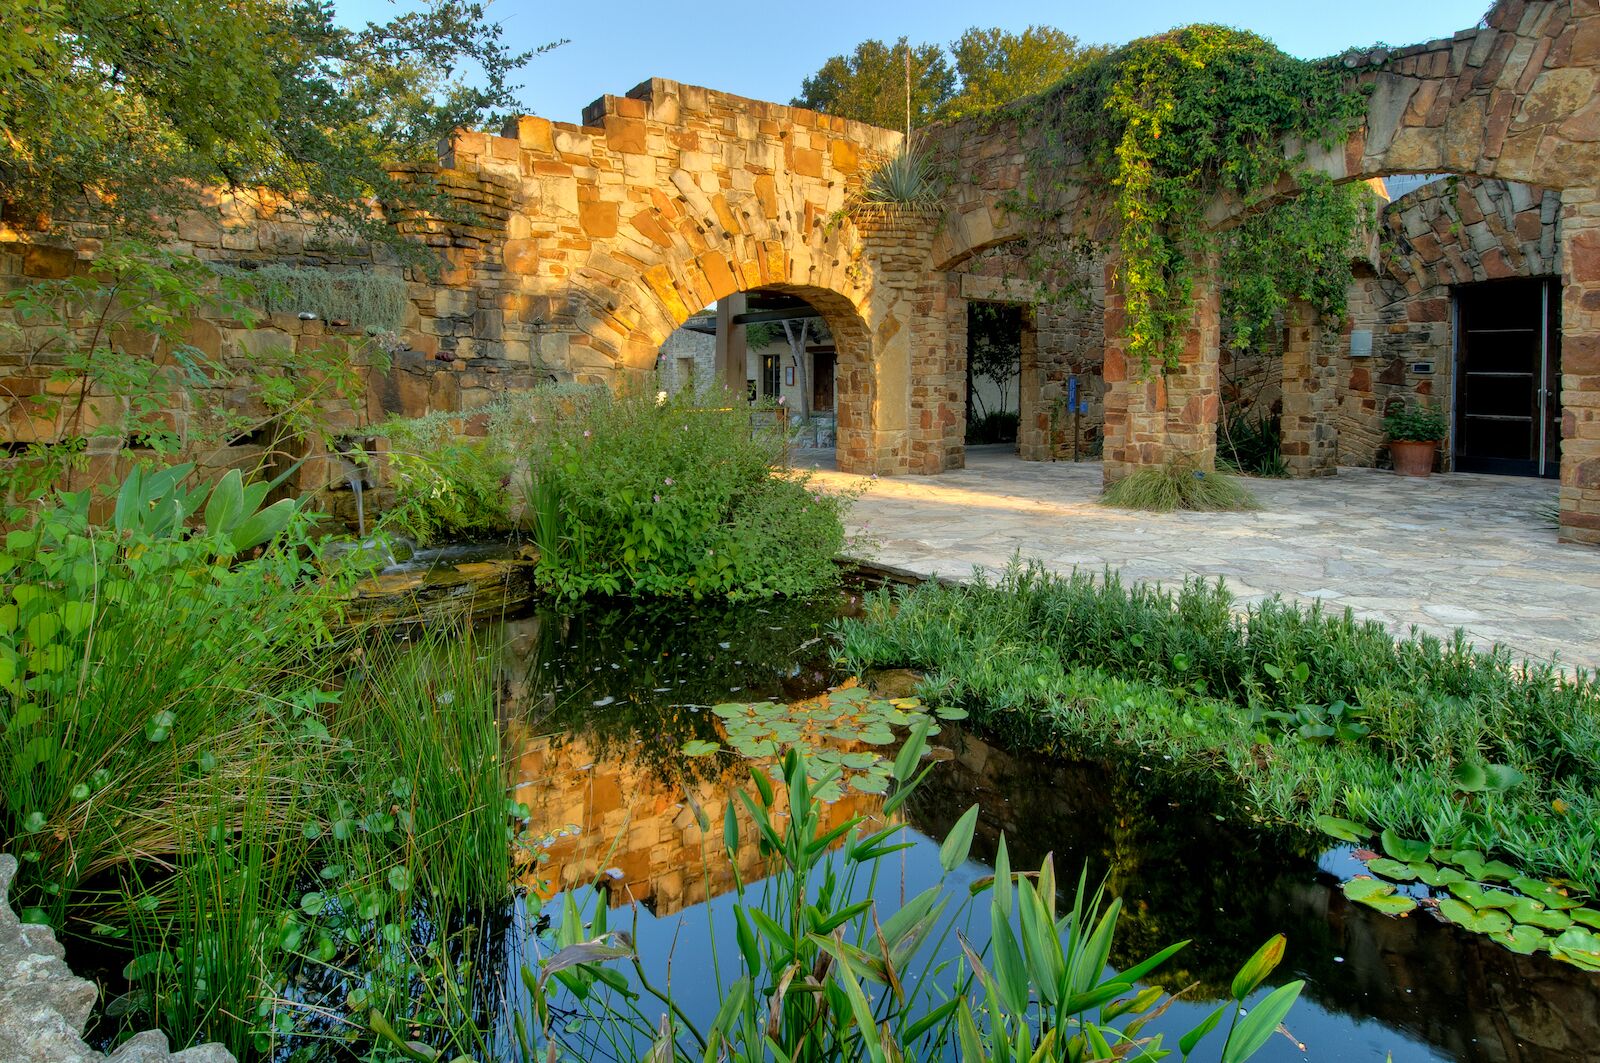 Museums in Austin: The Lady Bird Johnson Wildflower Center